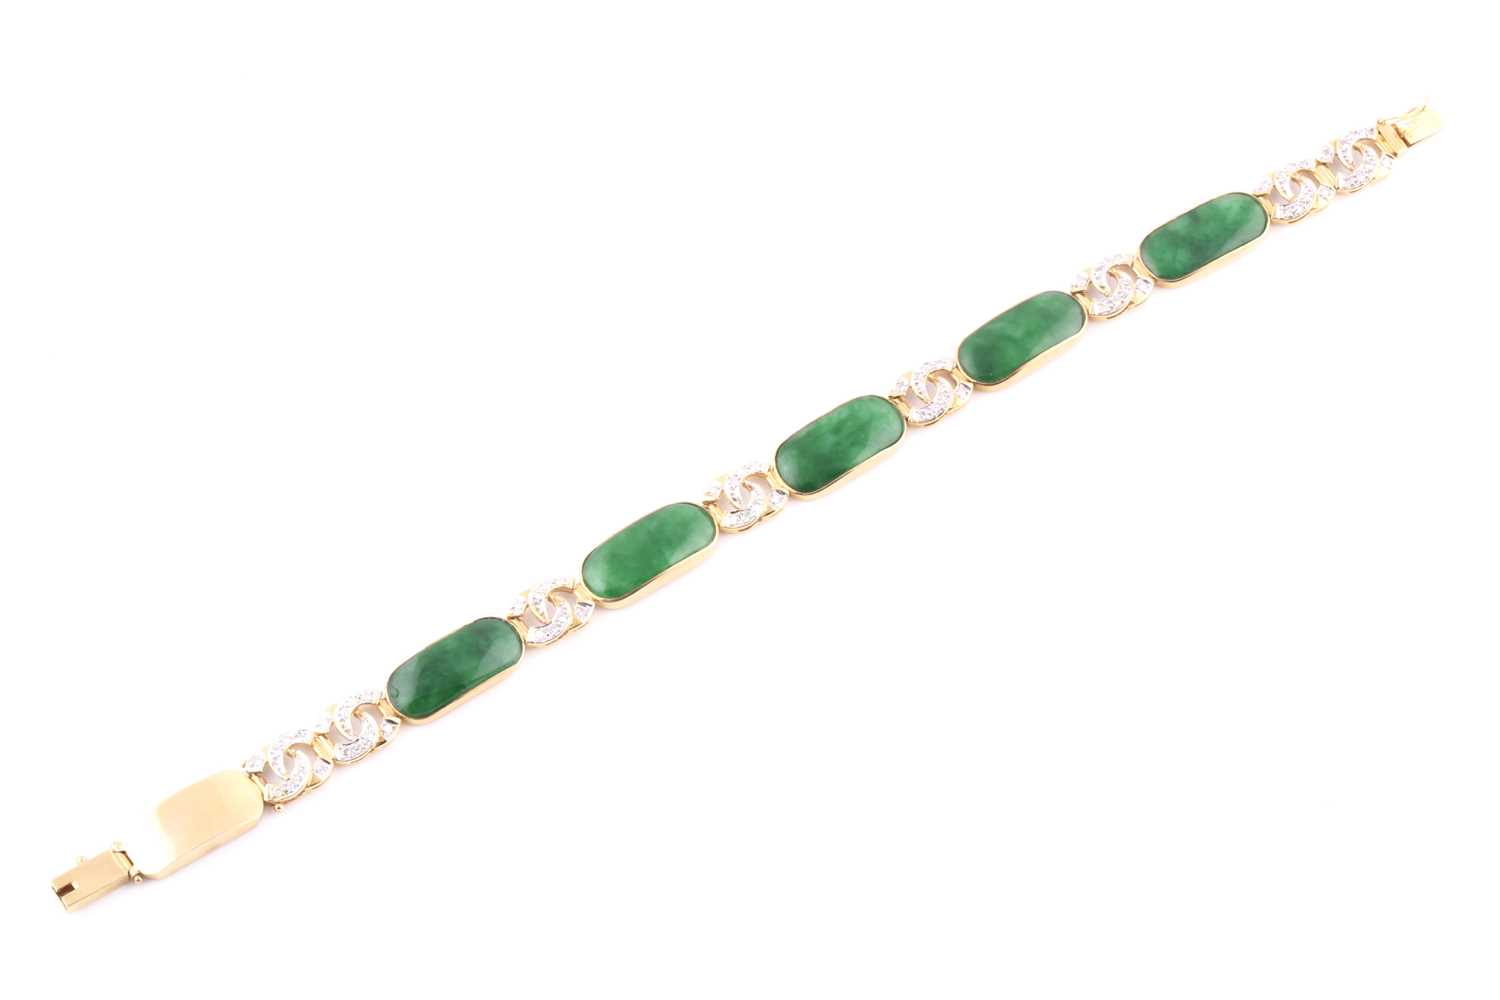 An 18ct yellow gold, green jade, and diamond bracelet, comprised of jade plaque links with